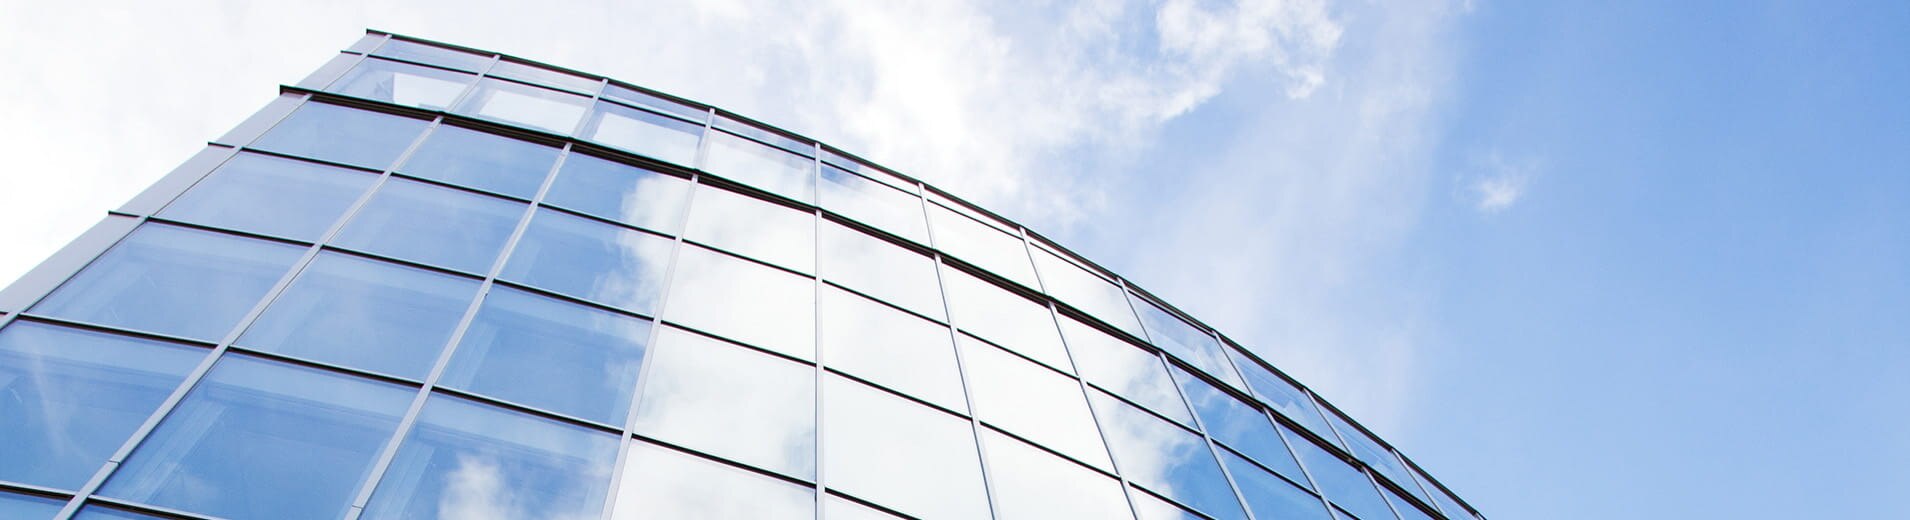 Curved_Glass_Facade_P_1076